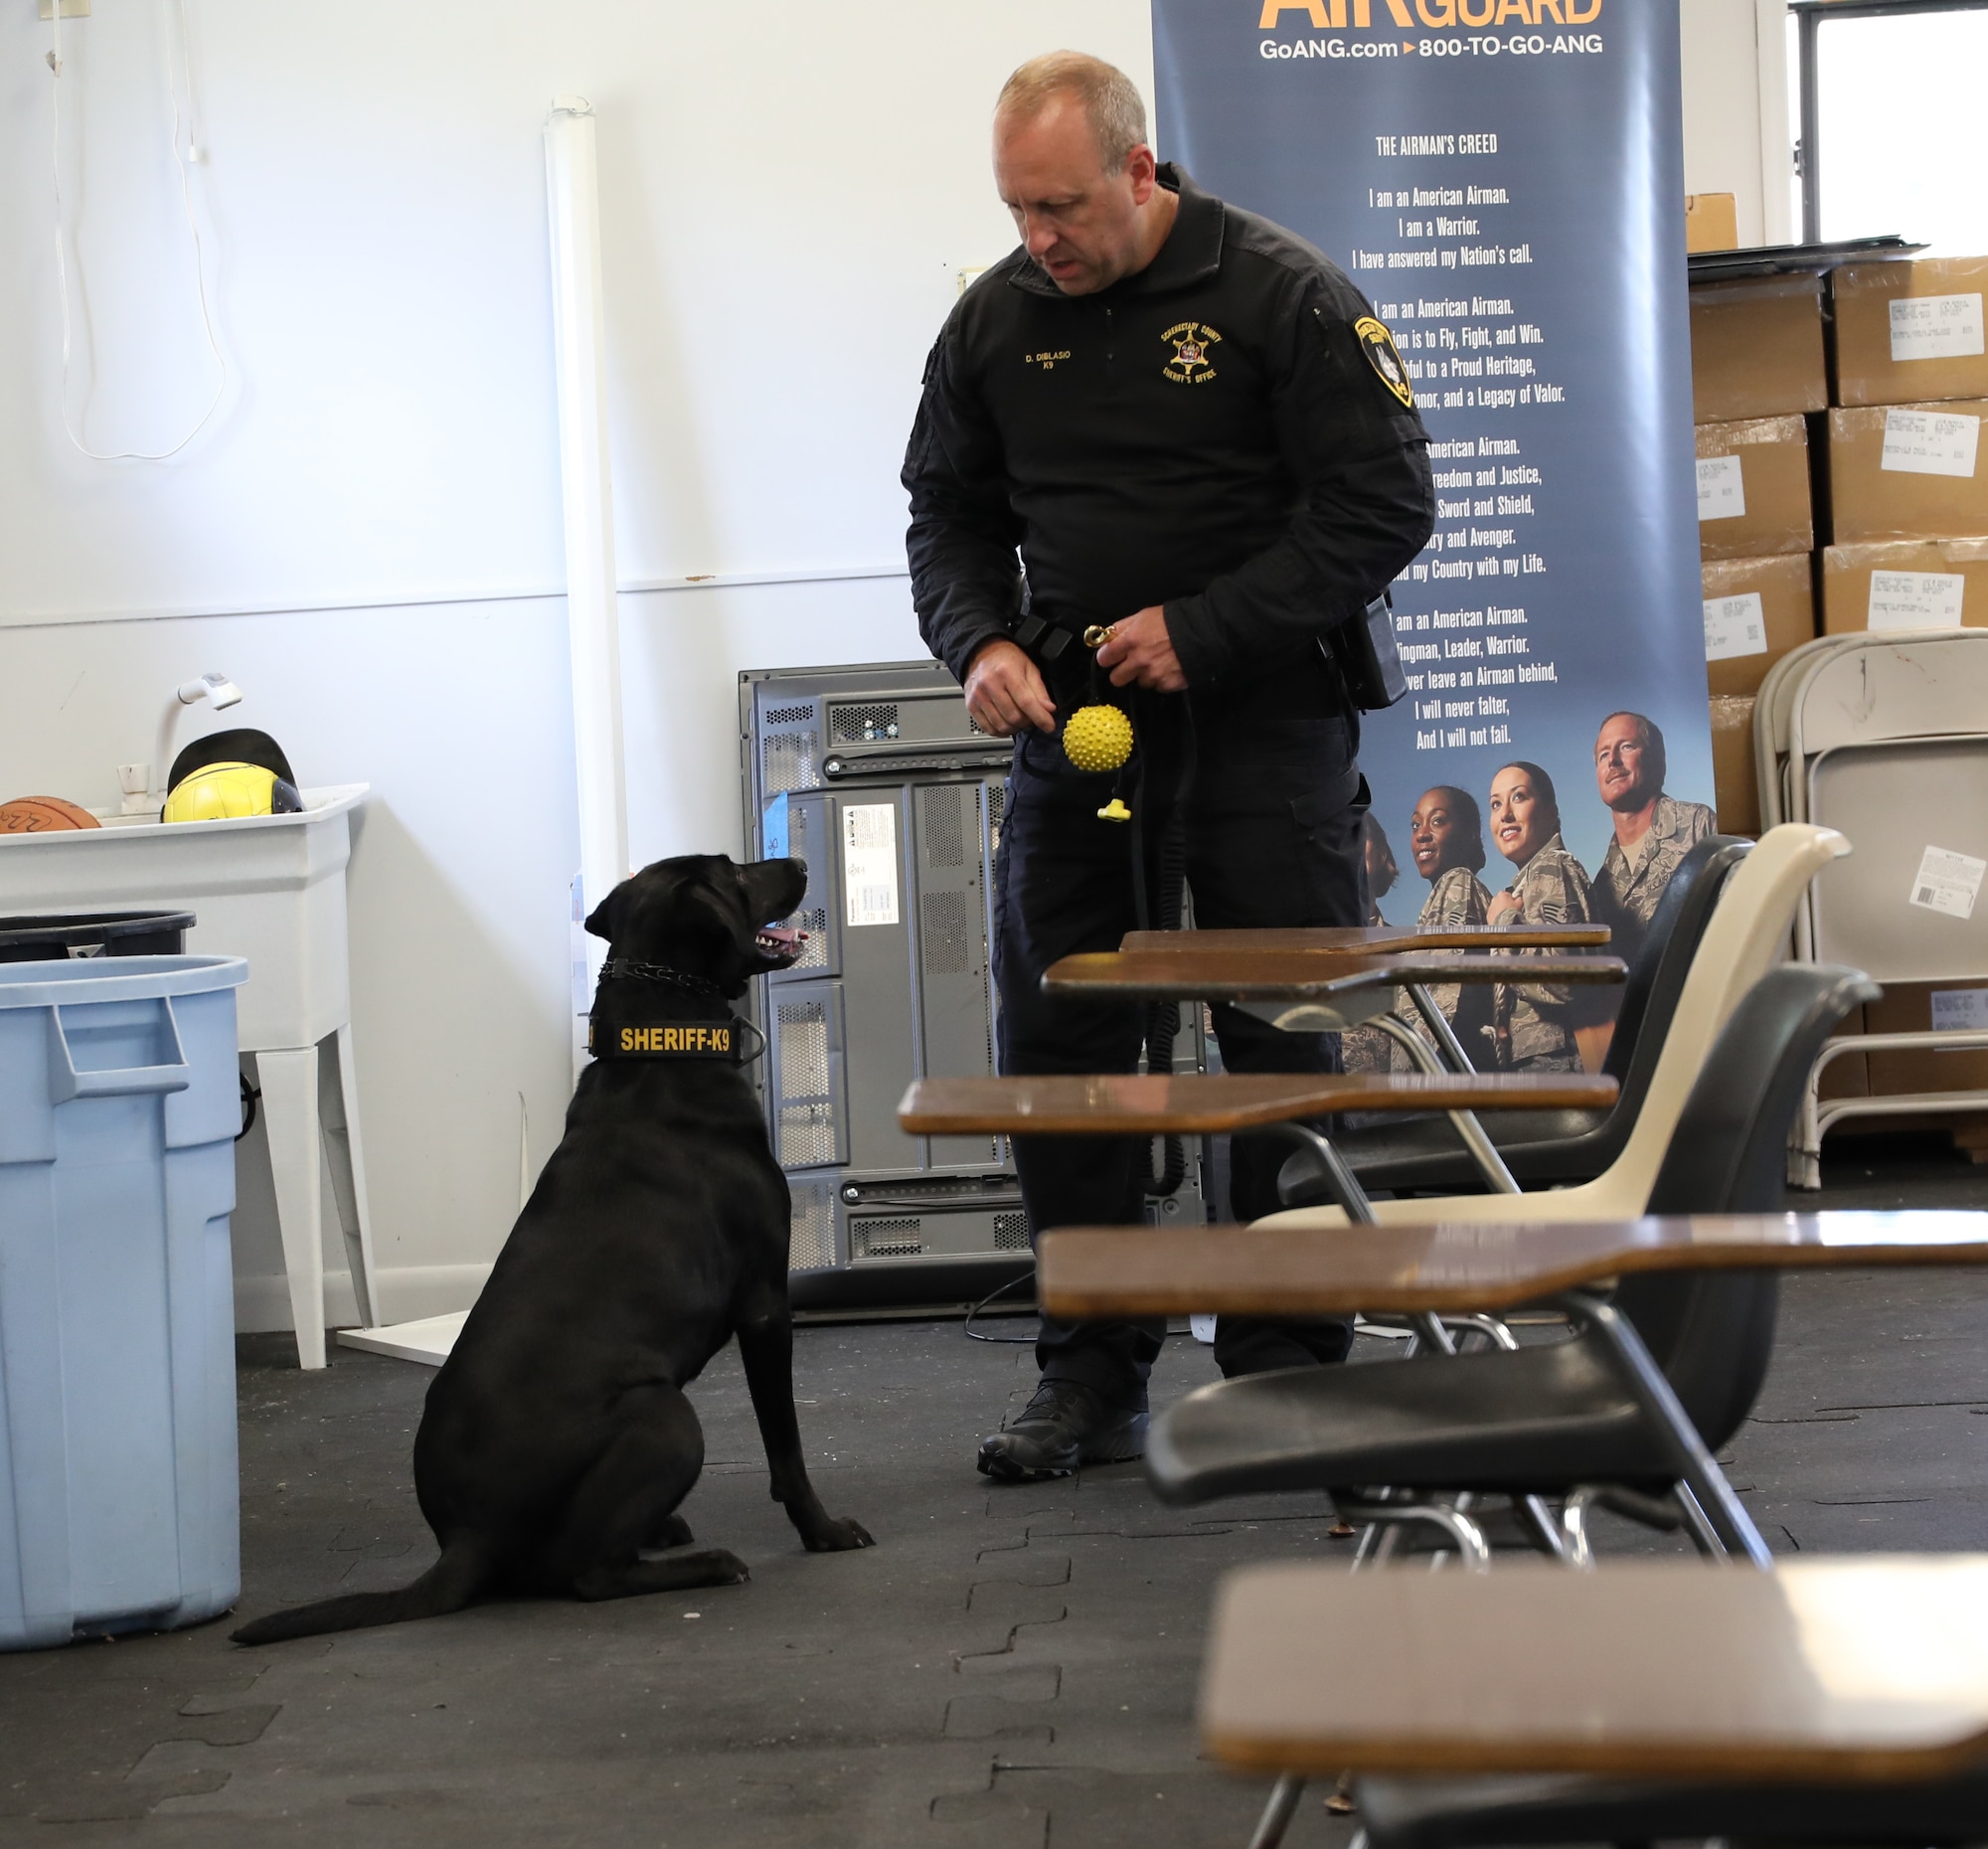 K9 Maizey works with her handler Dan Diblasio, a police officer with the Schenectady County Sheriff Office. The Officers and K9s recently trained at Stratton ANGB where they also provide support to the Security Forces Squadron when needed. (U.S. Air National Guard photo by Ms. Jaclyn Lyons)